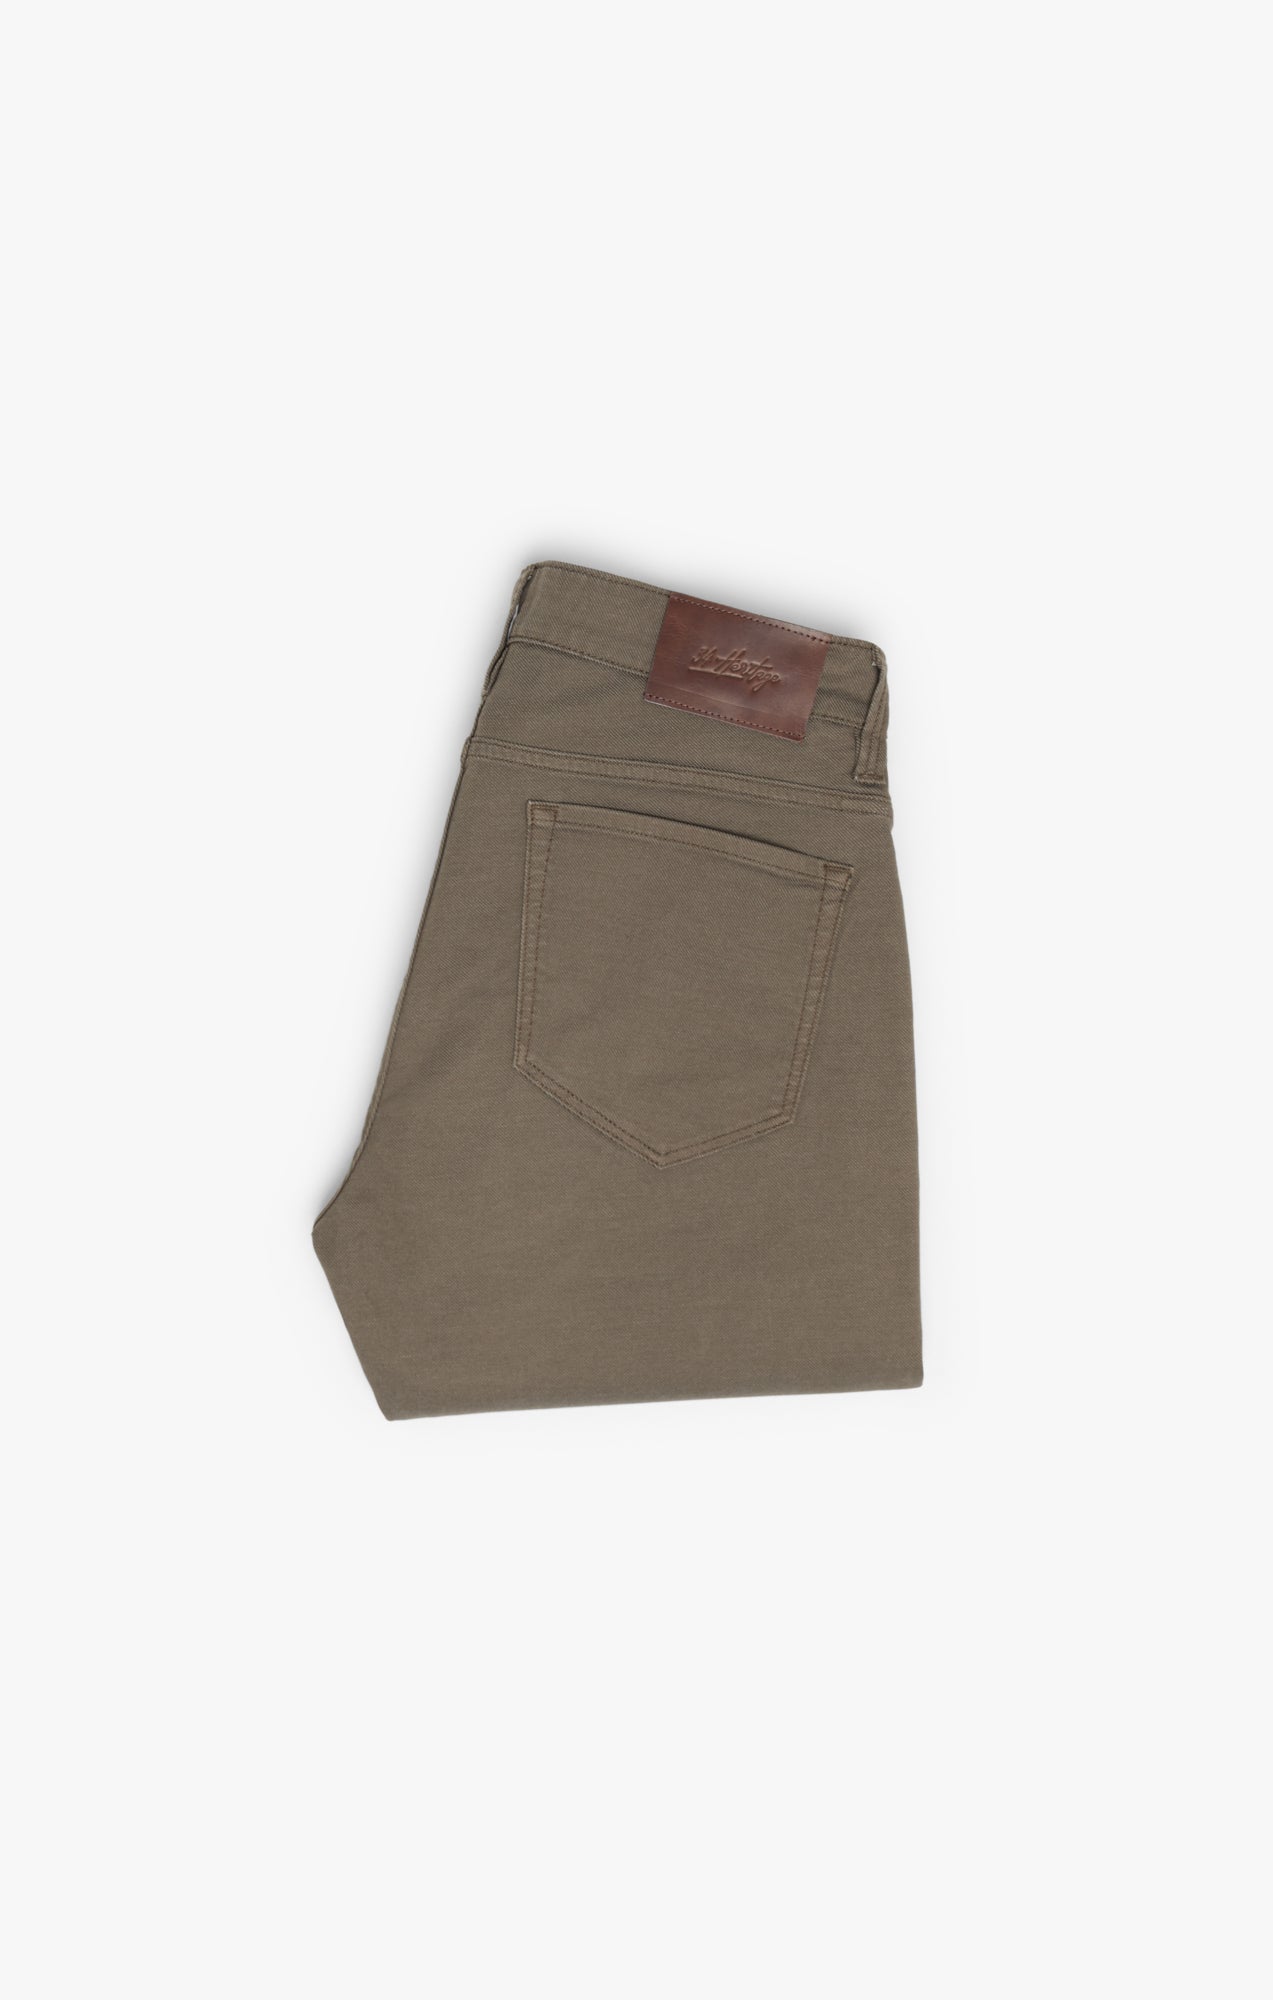 Courage Straight Leg Pants in Canteen Coolmax Image 11